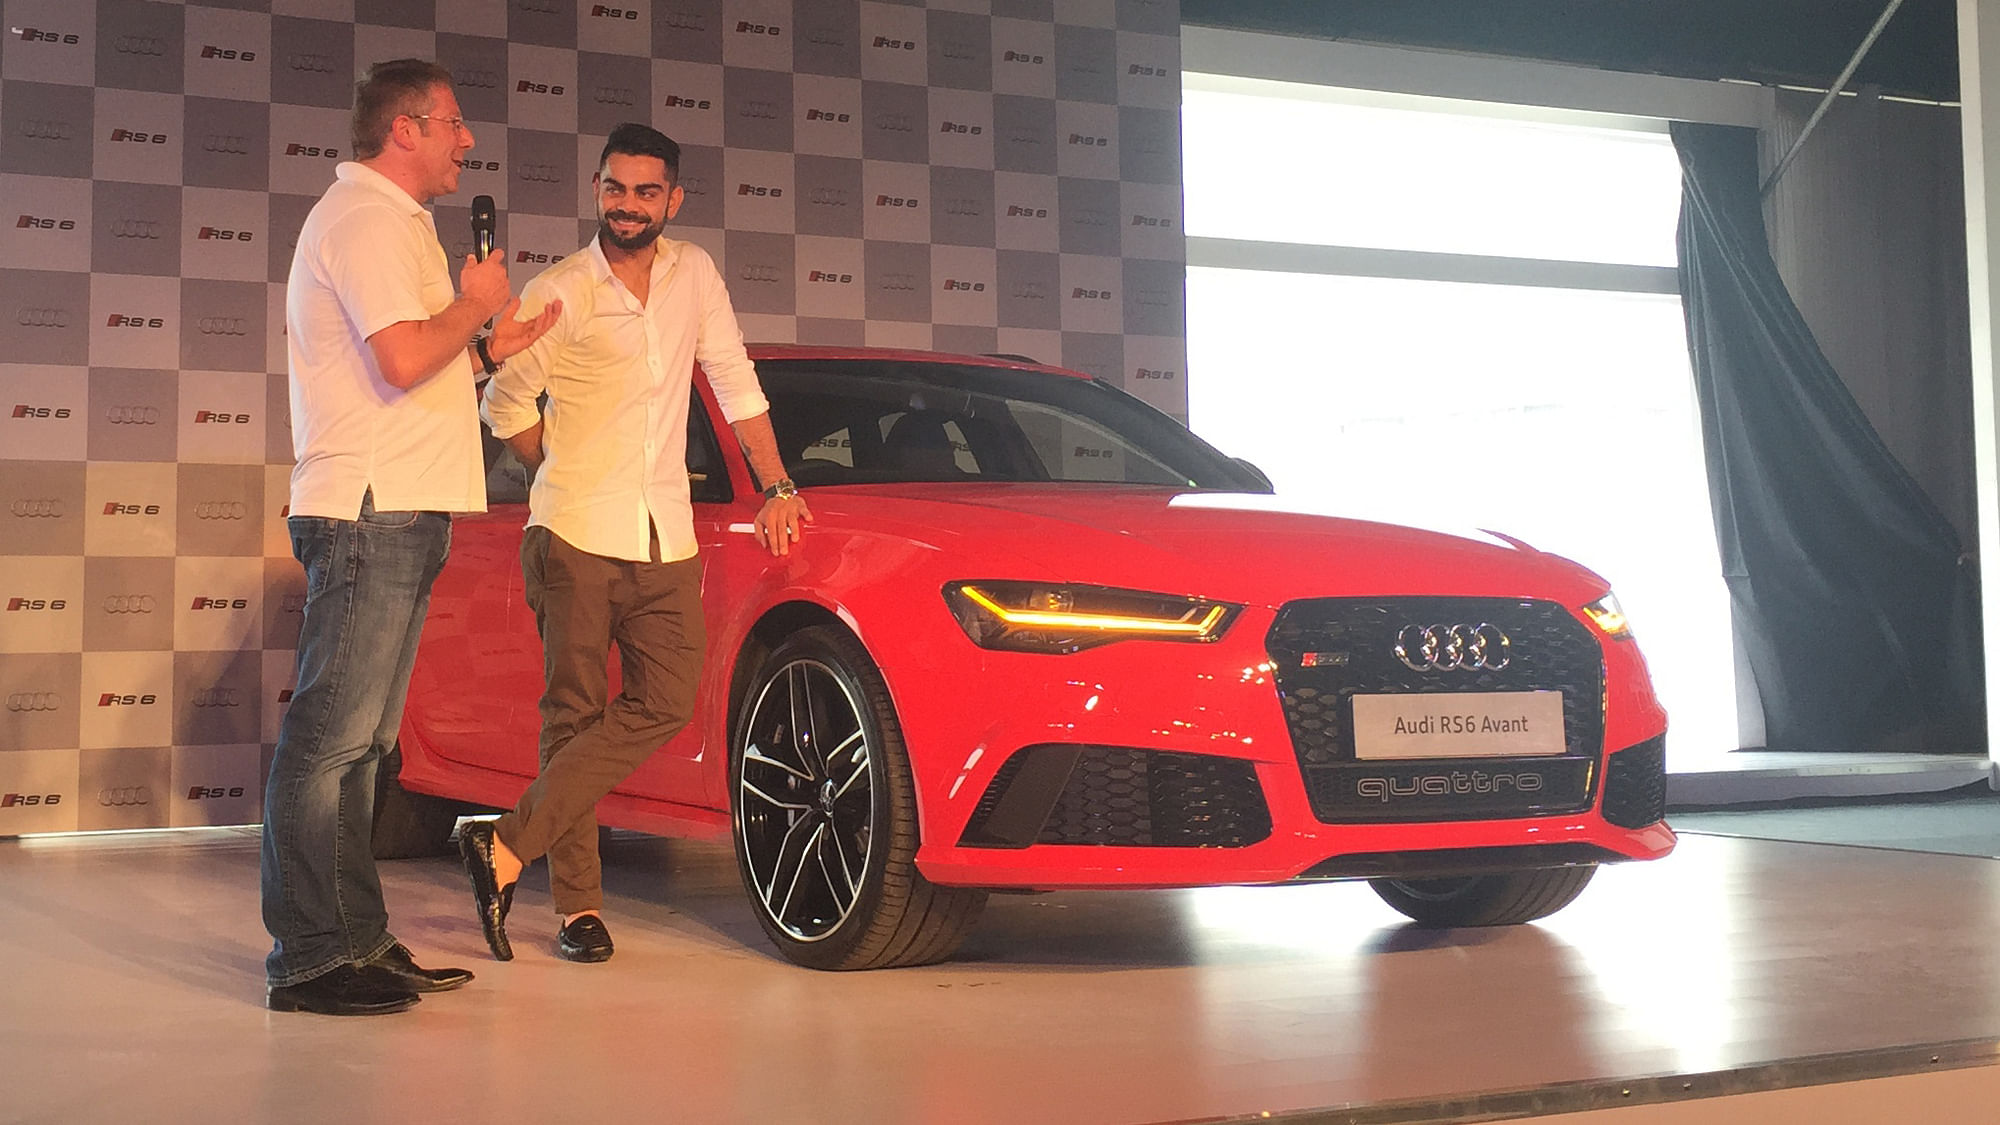 (Left)&nbsp;Joe King, Head, Audi India with Ace Cricketer Virat Kohli at the launch of Audi RS 6 Avant in India. (Photo: The Quint)